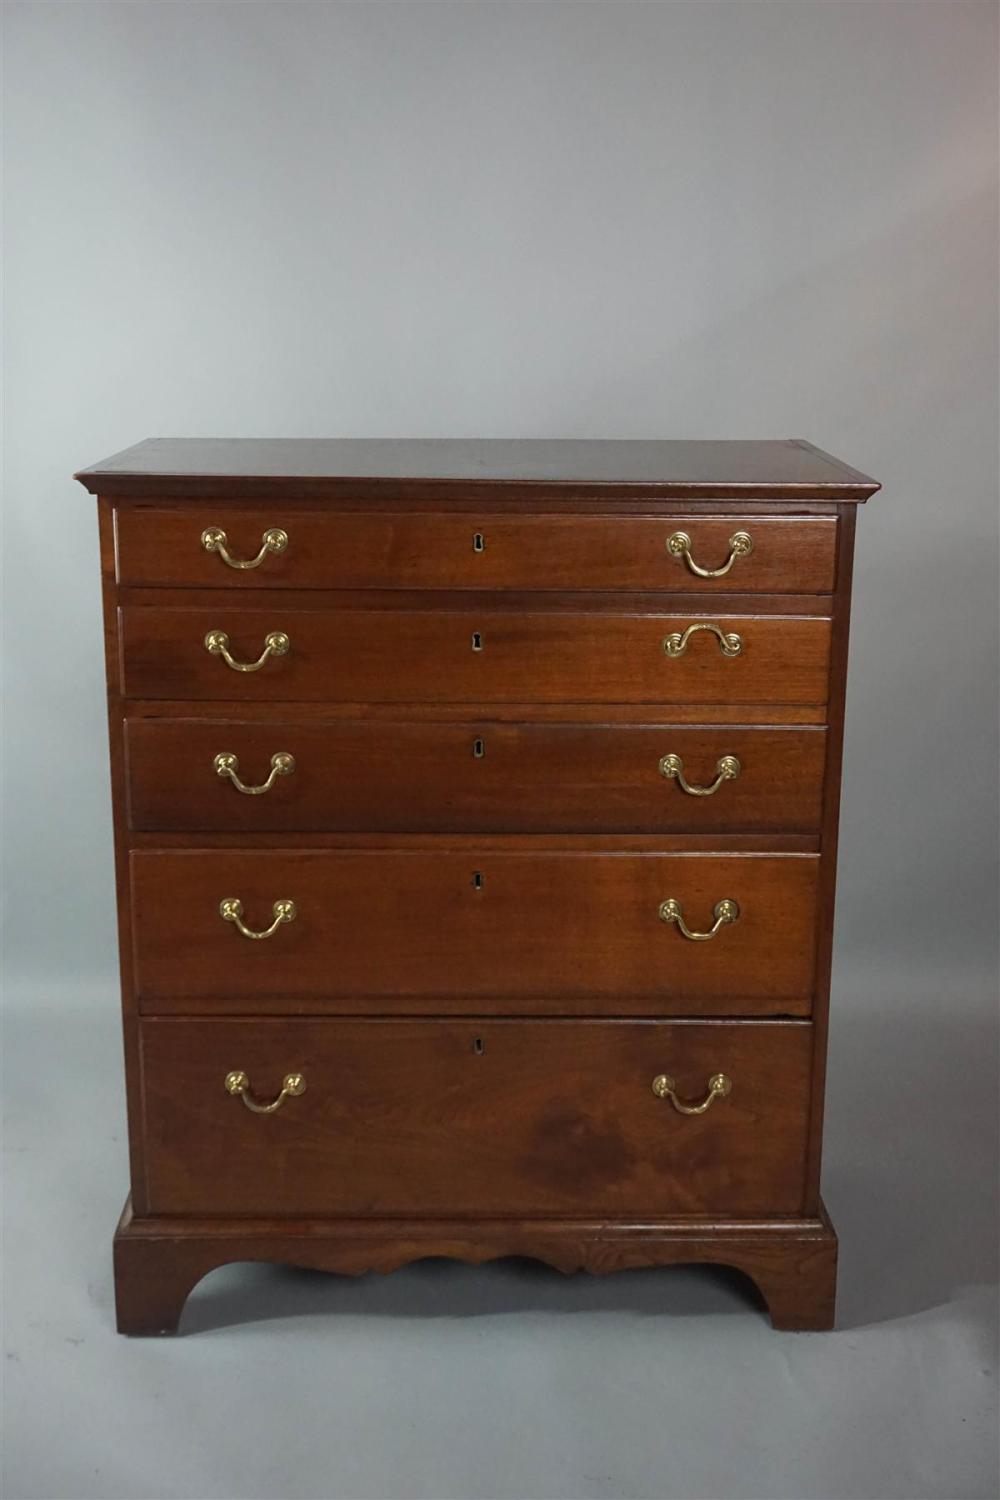 MARYLAND CHIPPENDALE WALNUT CHEST 312e53